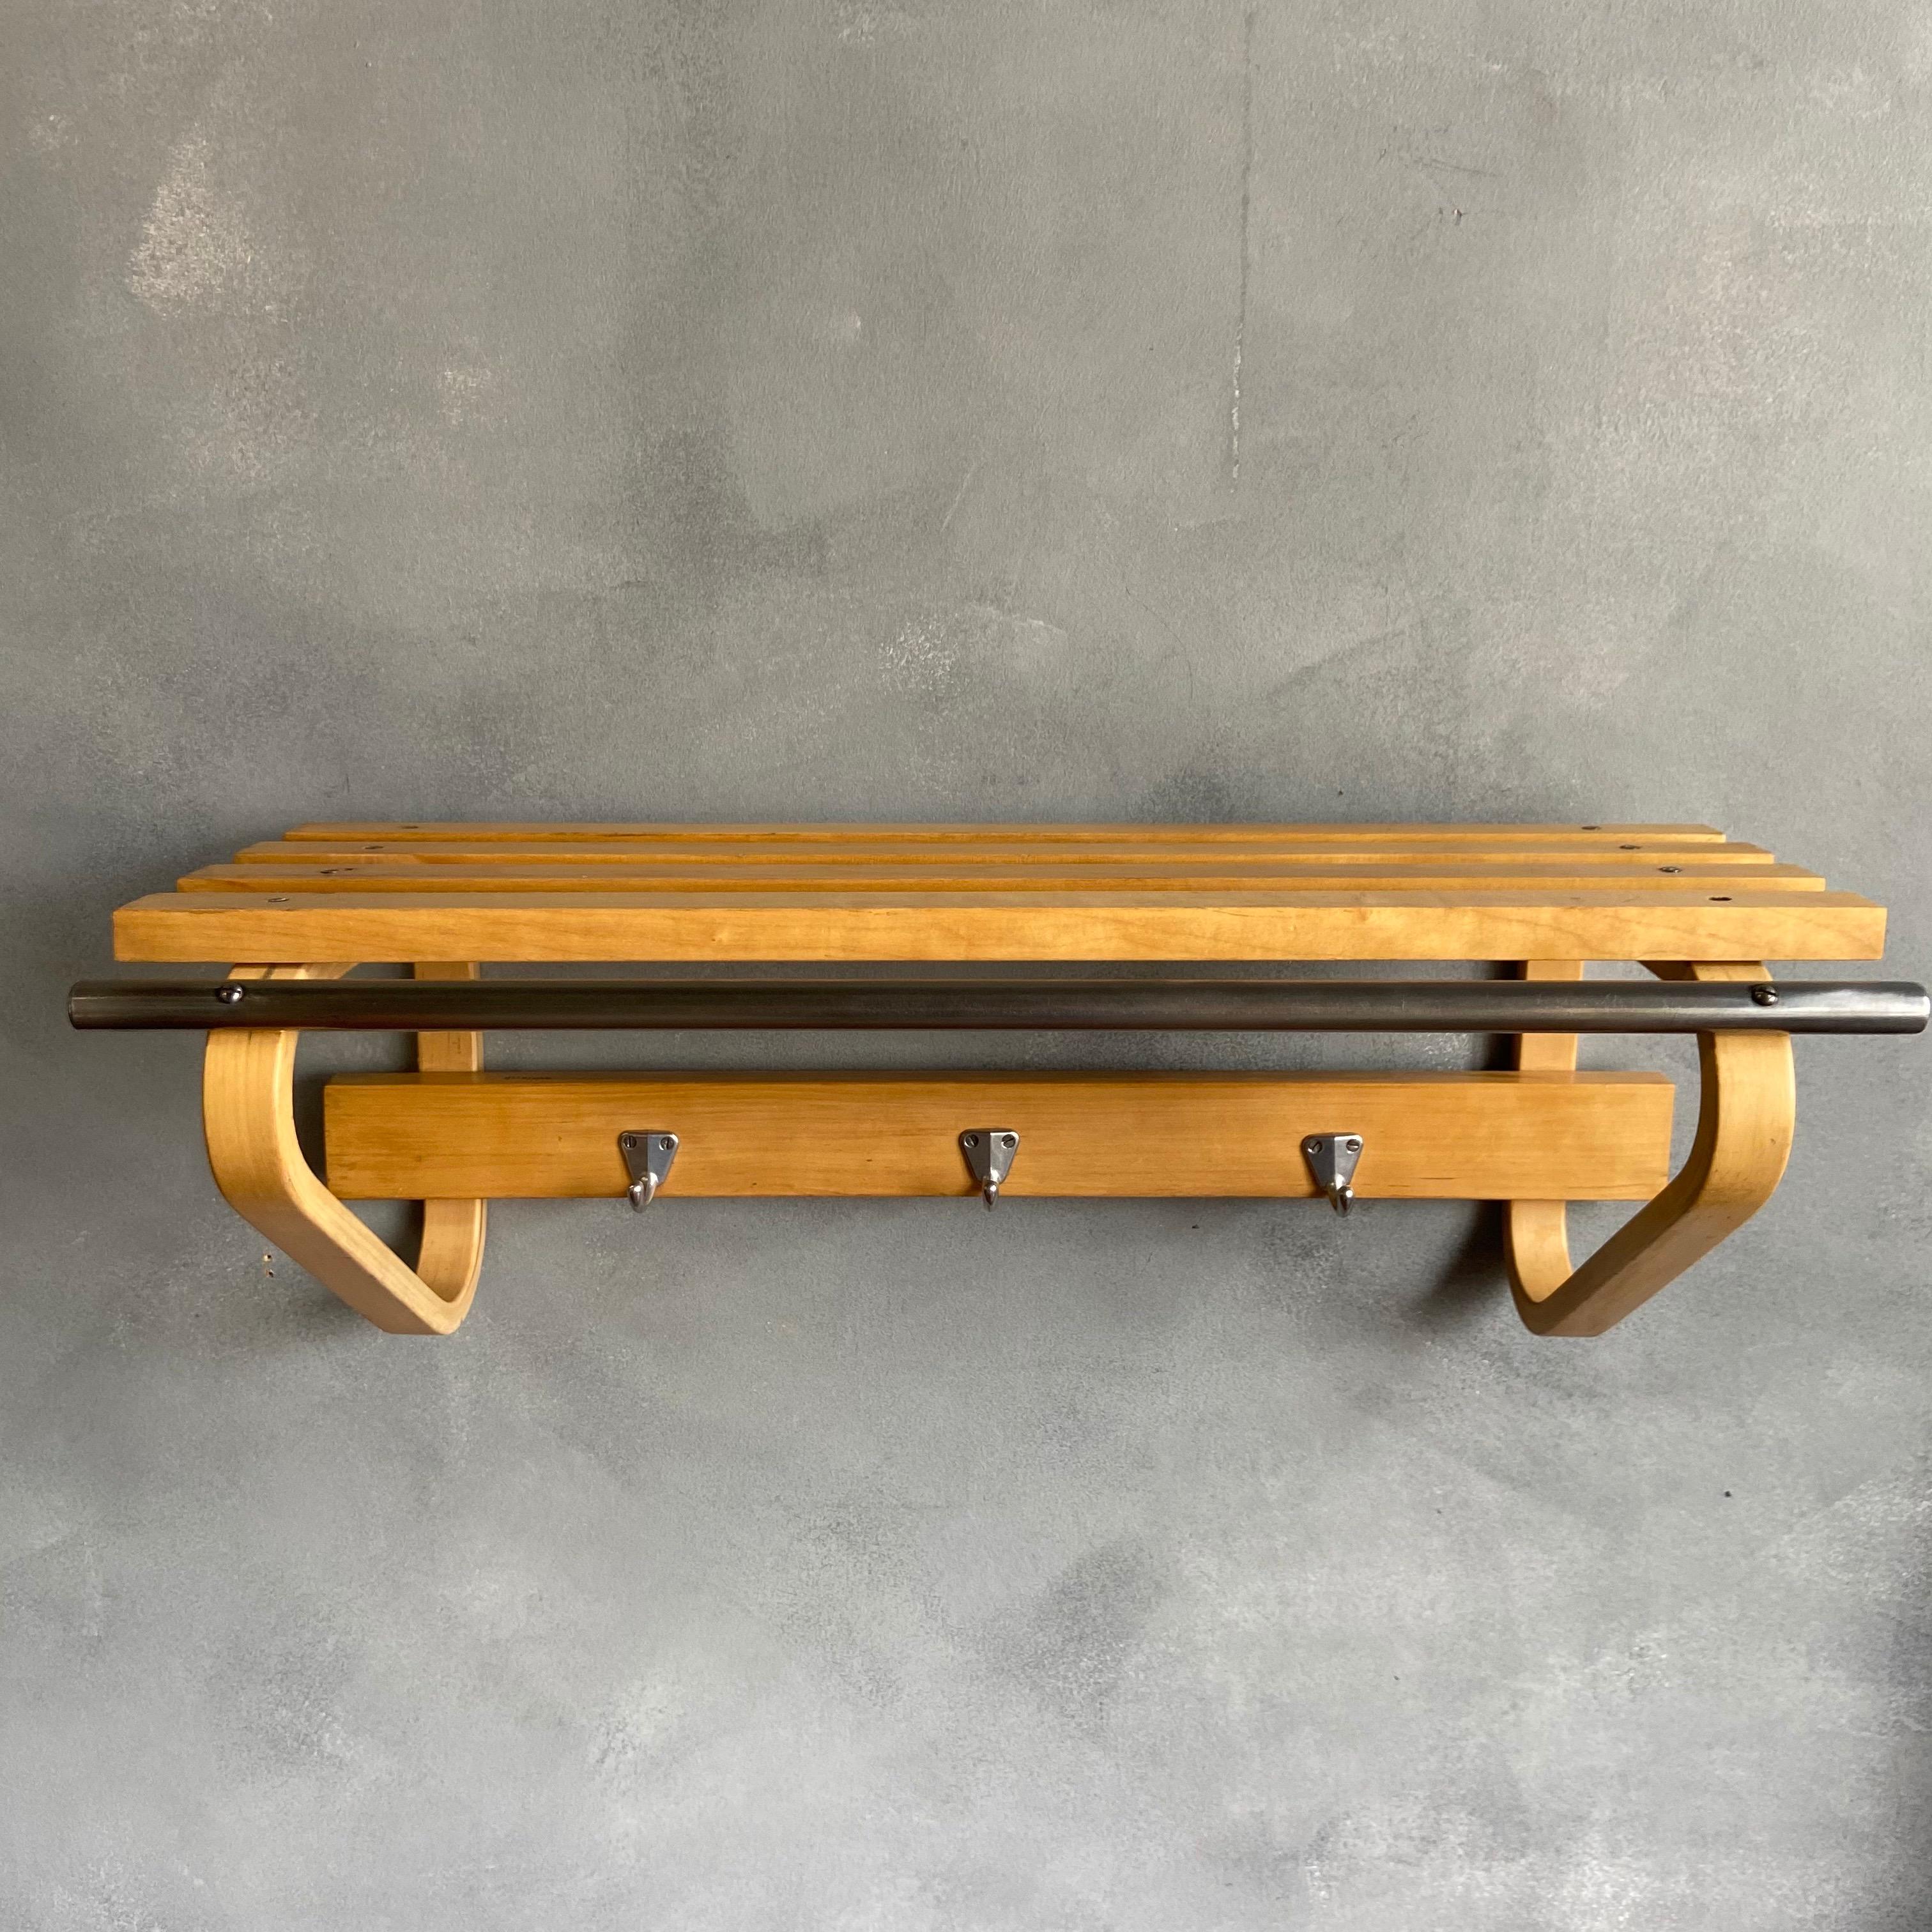 For your consideration is this original coat rack with shelf designed by Alvar Aalto for Artek circa 1960 featuring birch wood, metal coat hooks and early nickel plated steel hanger rod. We have been lucky to receive a few of these in our shop among